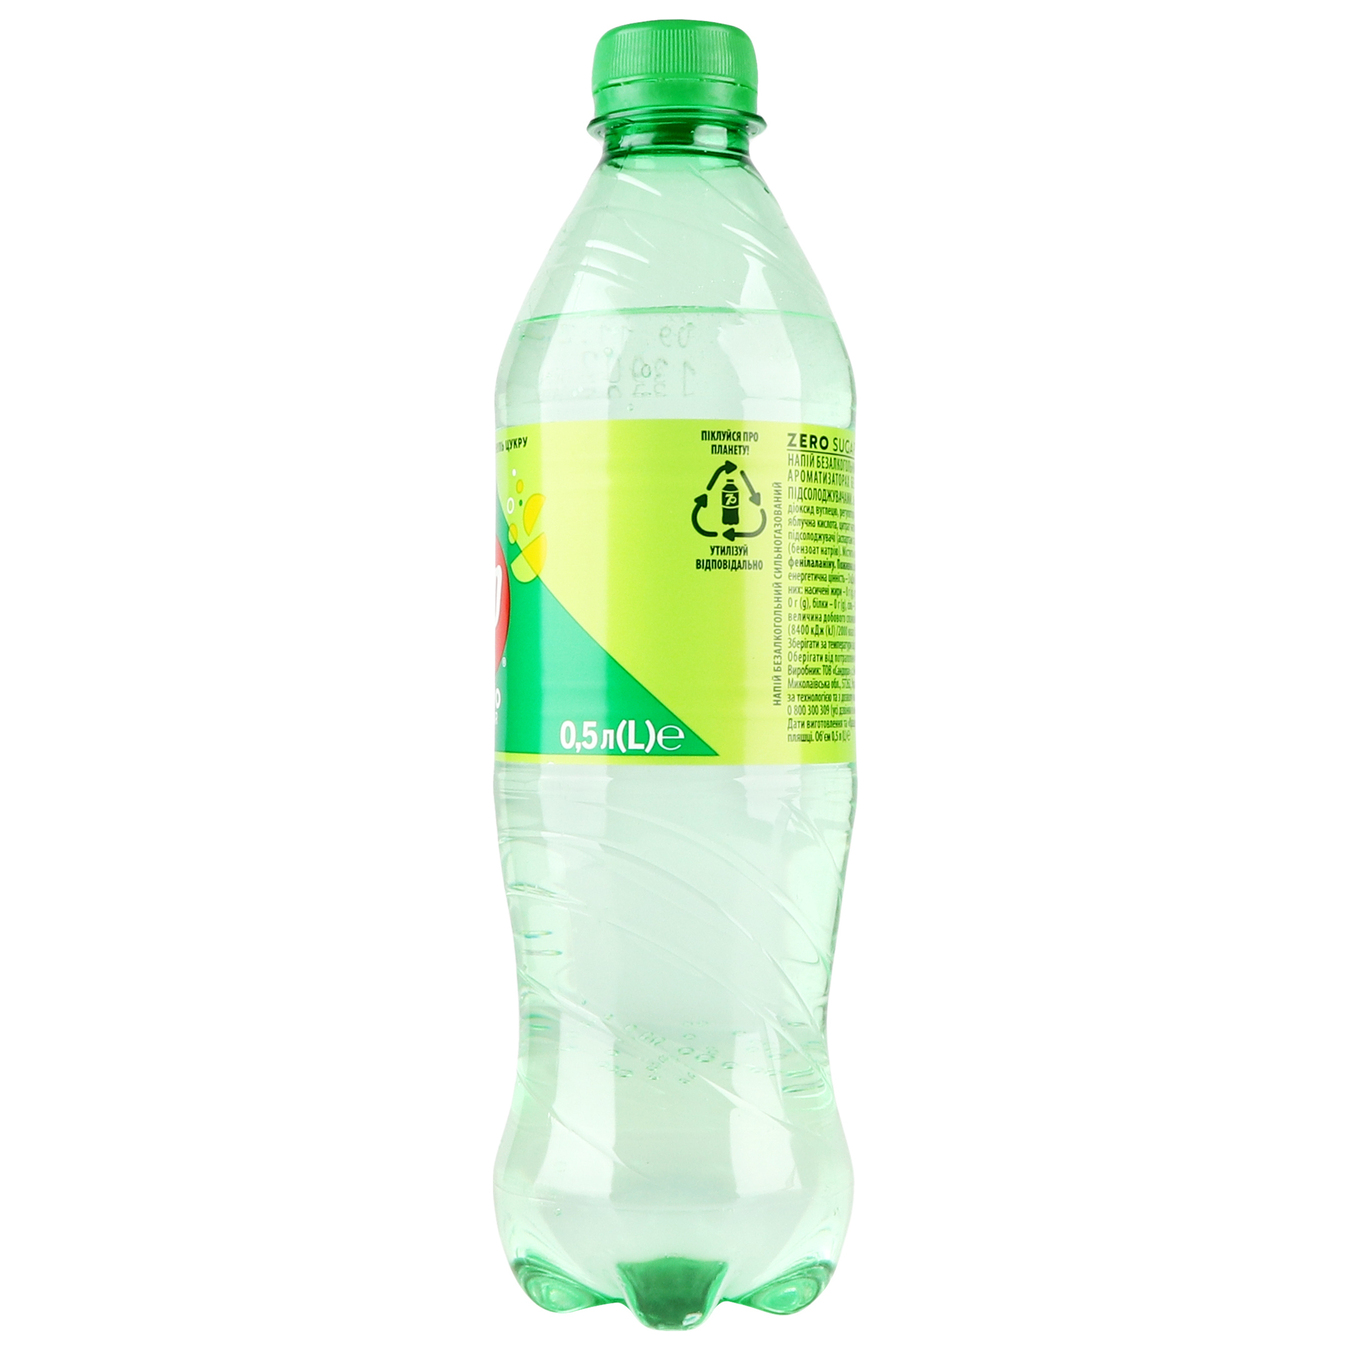 Carbonated drink 7 UP Free 0.5l 4